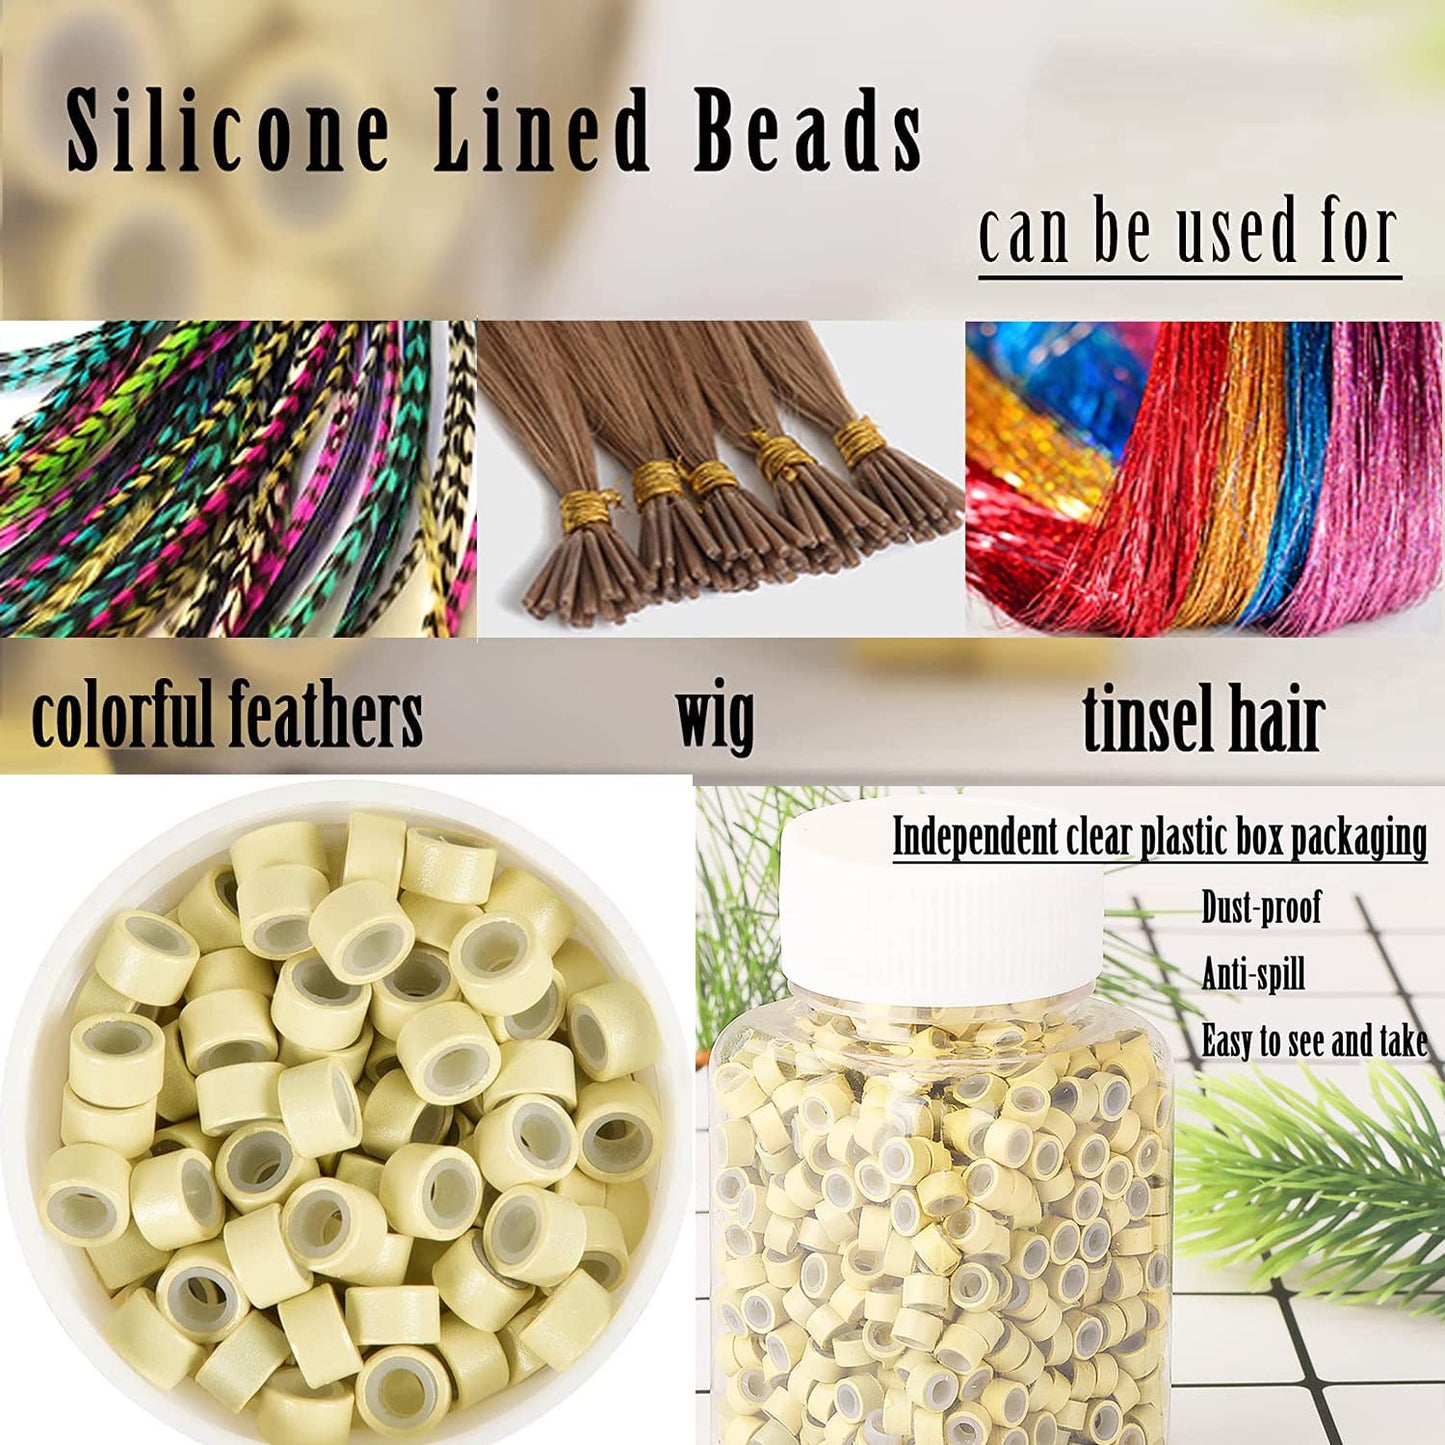 Micro Link Beads 5mm for Hair Extensions - 500 Silicone Lined Beads for Human Micro Link Rings Silicone Hair Extensions Tool(Dark brown)